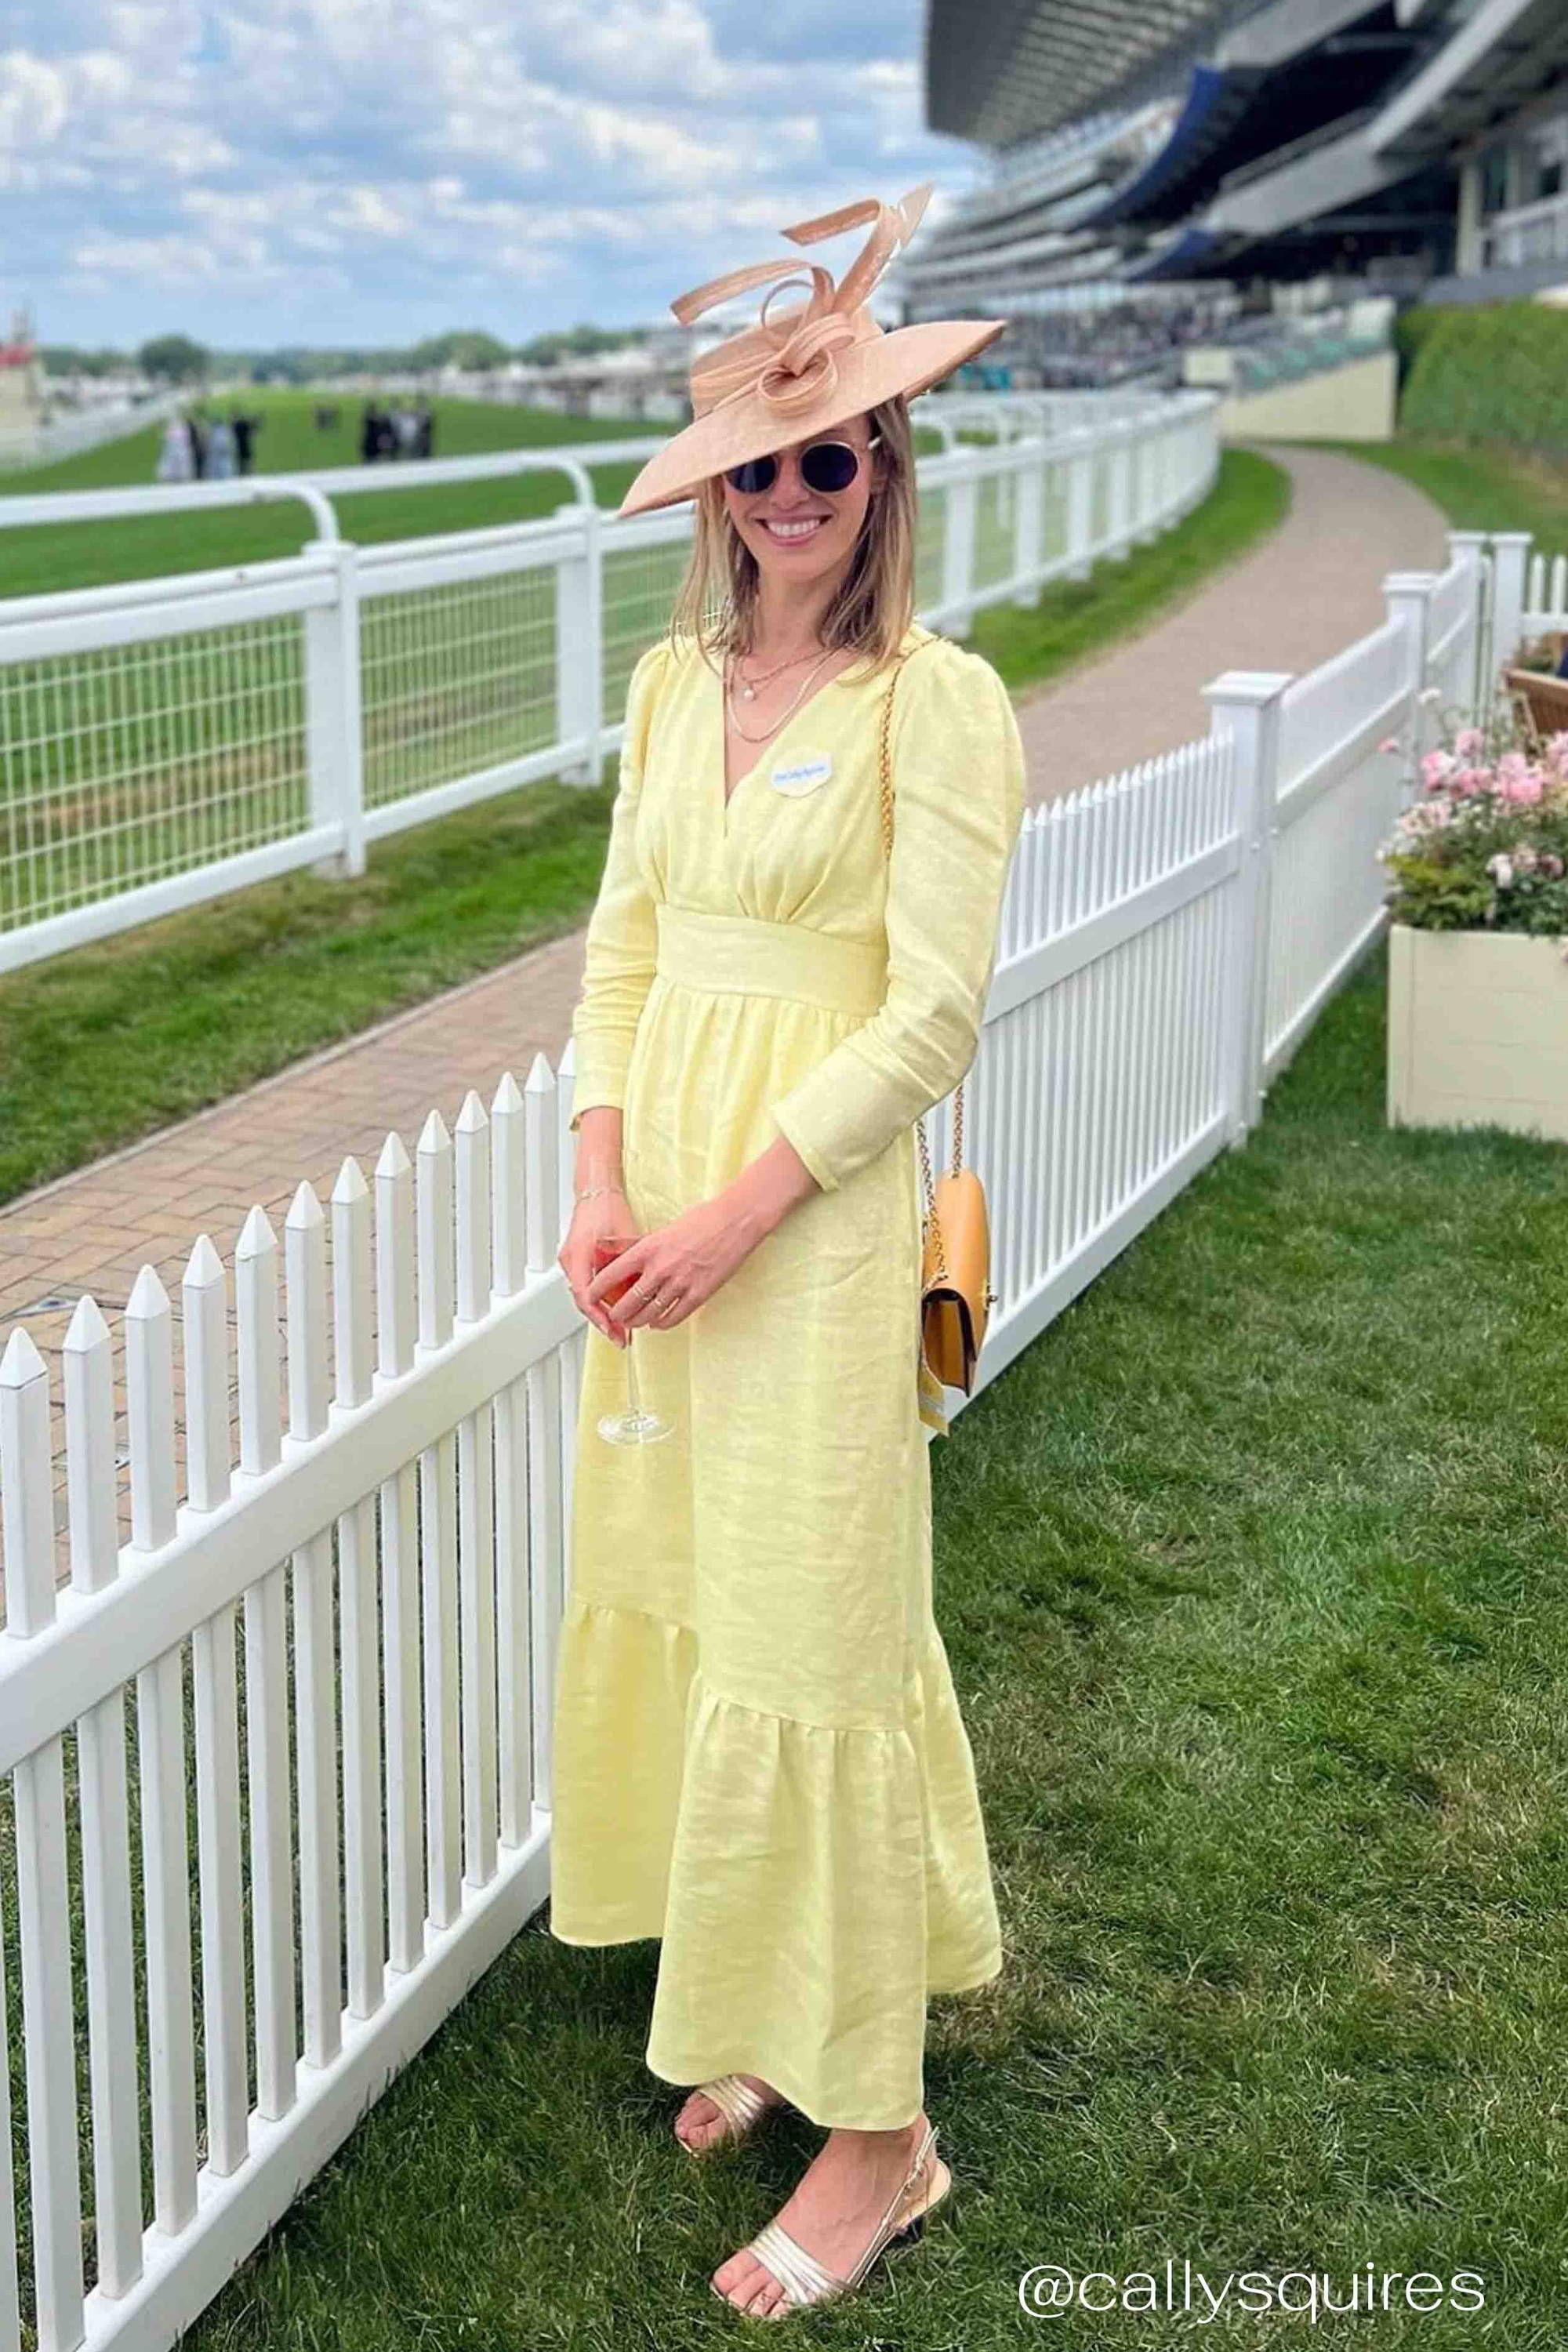 Journalist Cally Squires wears the Yolke sparkly sunshine yellow Coco dress